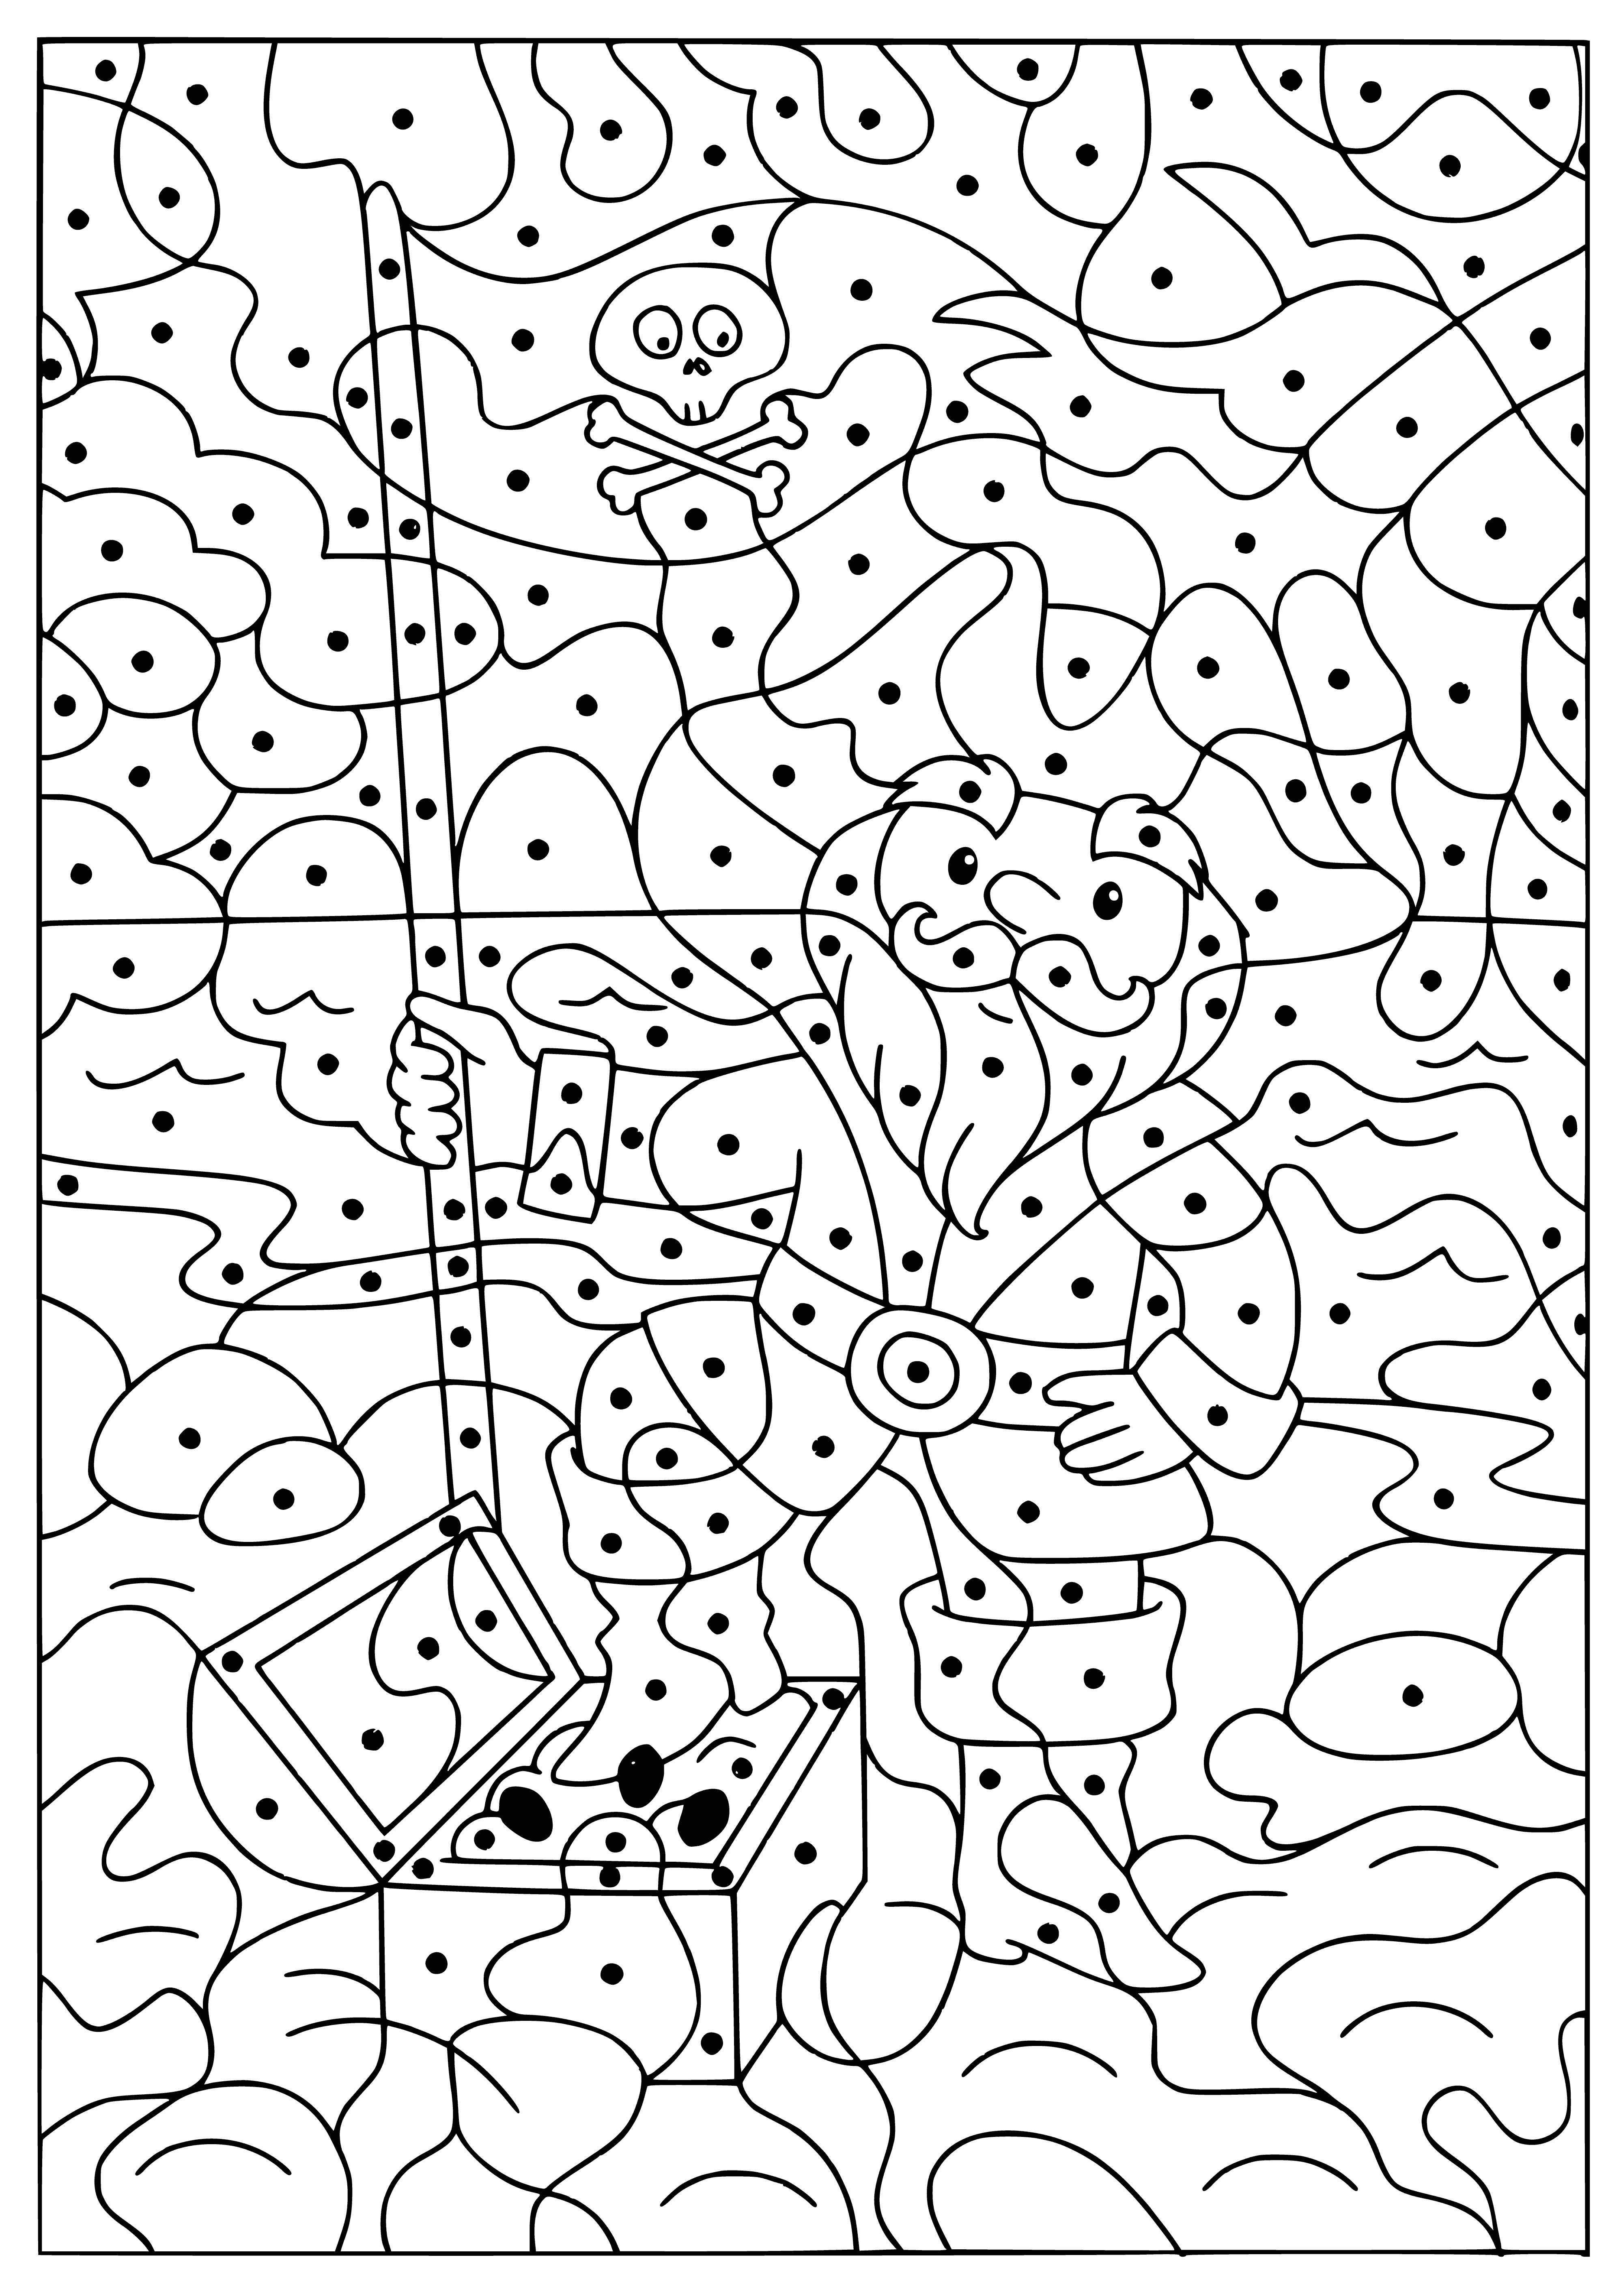 coloring page: Pirate on a ship, sword & flag in hand, searching for treasure in a chest. #Yarr #TreasuresAwaits